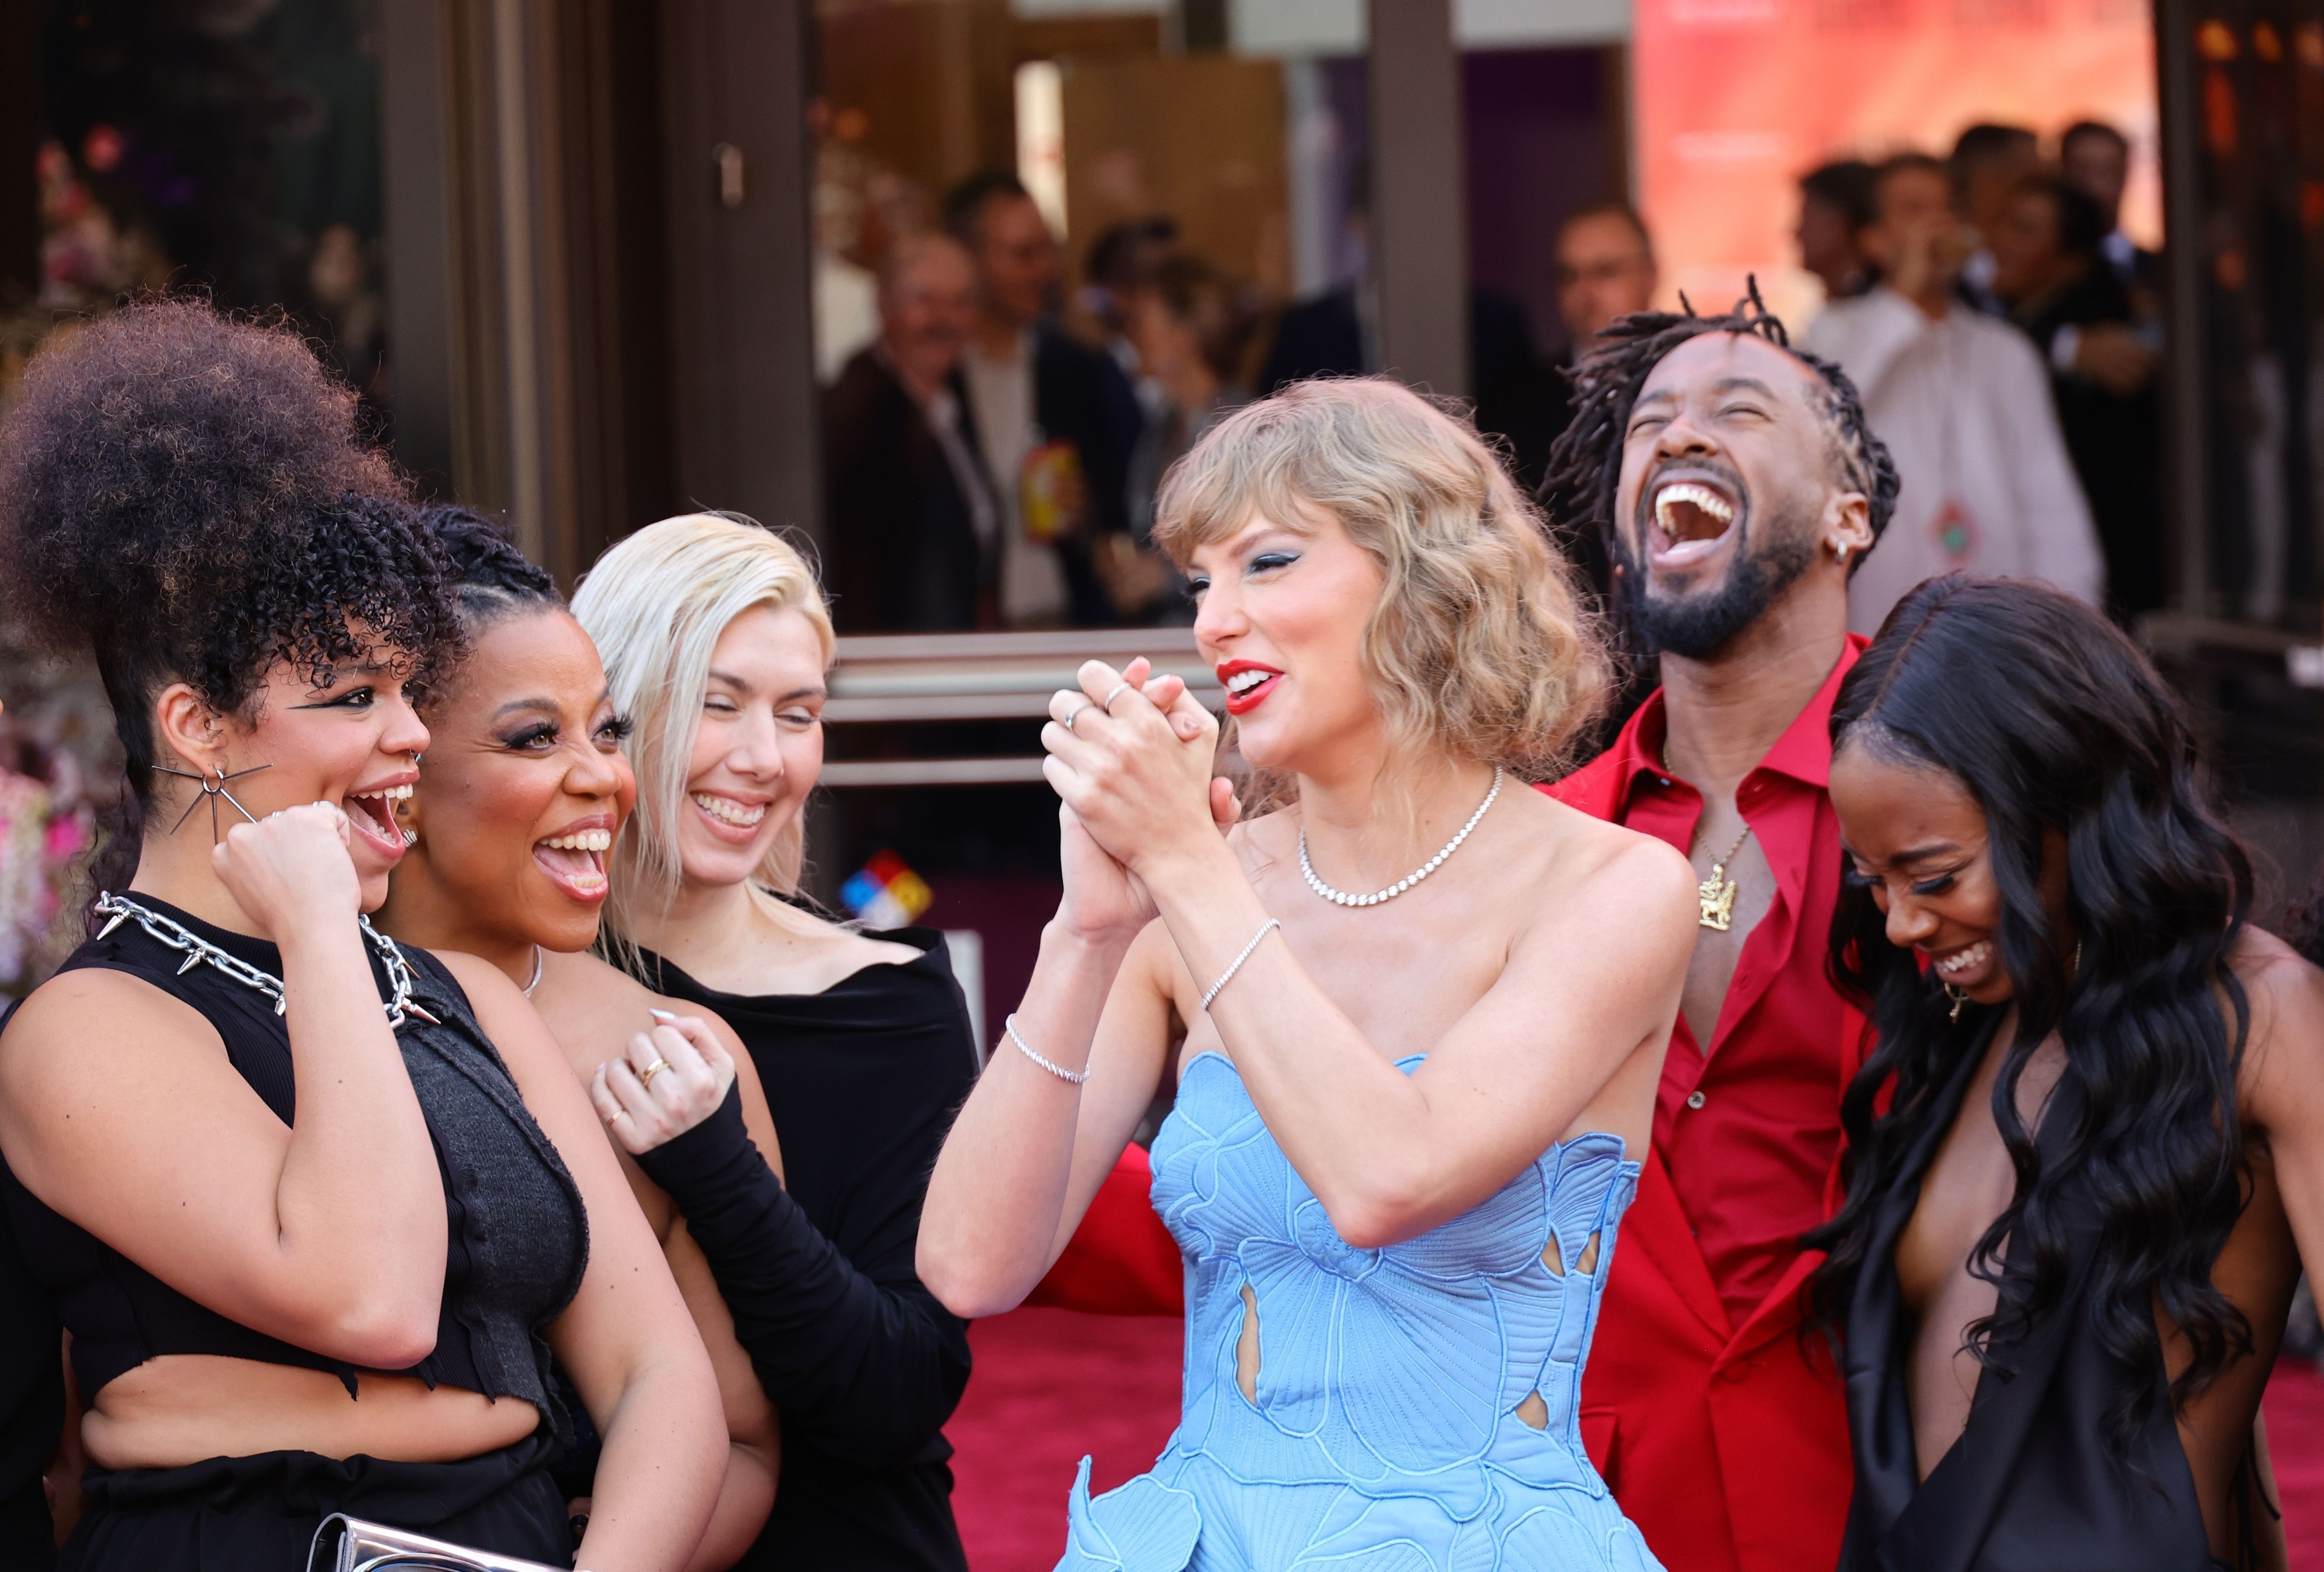 Taylor with some of her tour crew